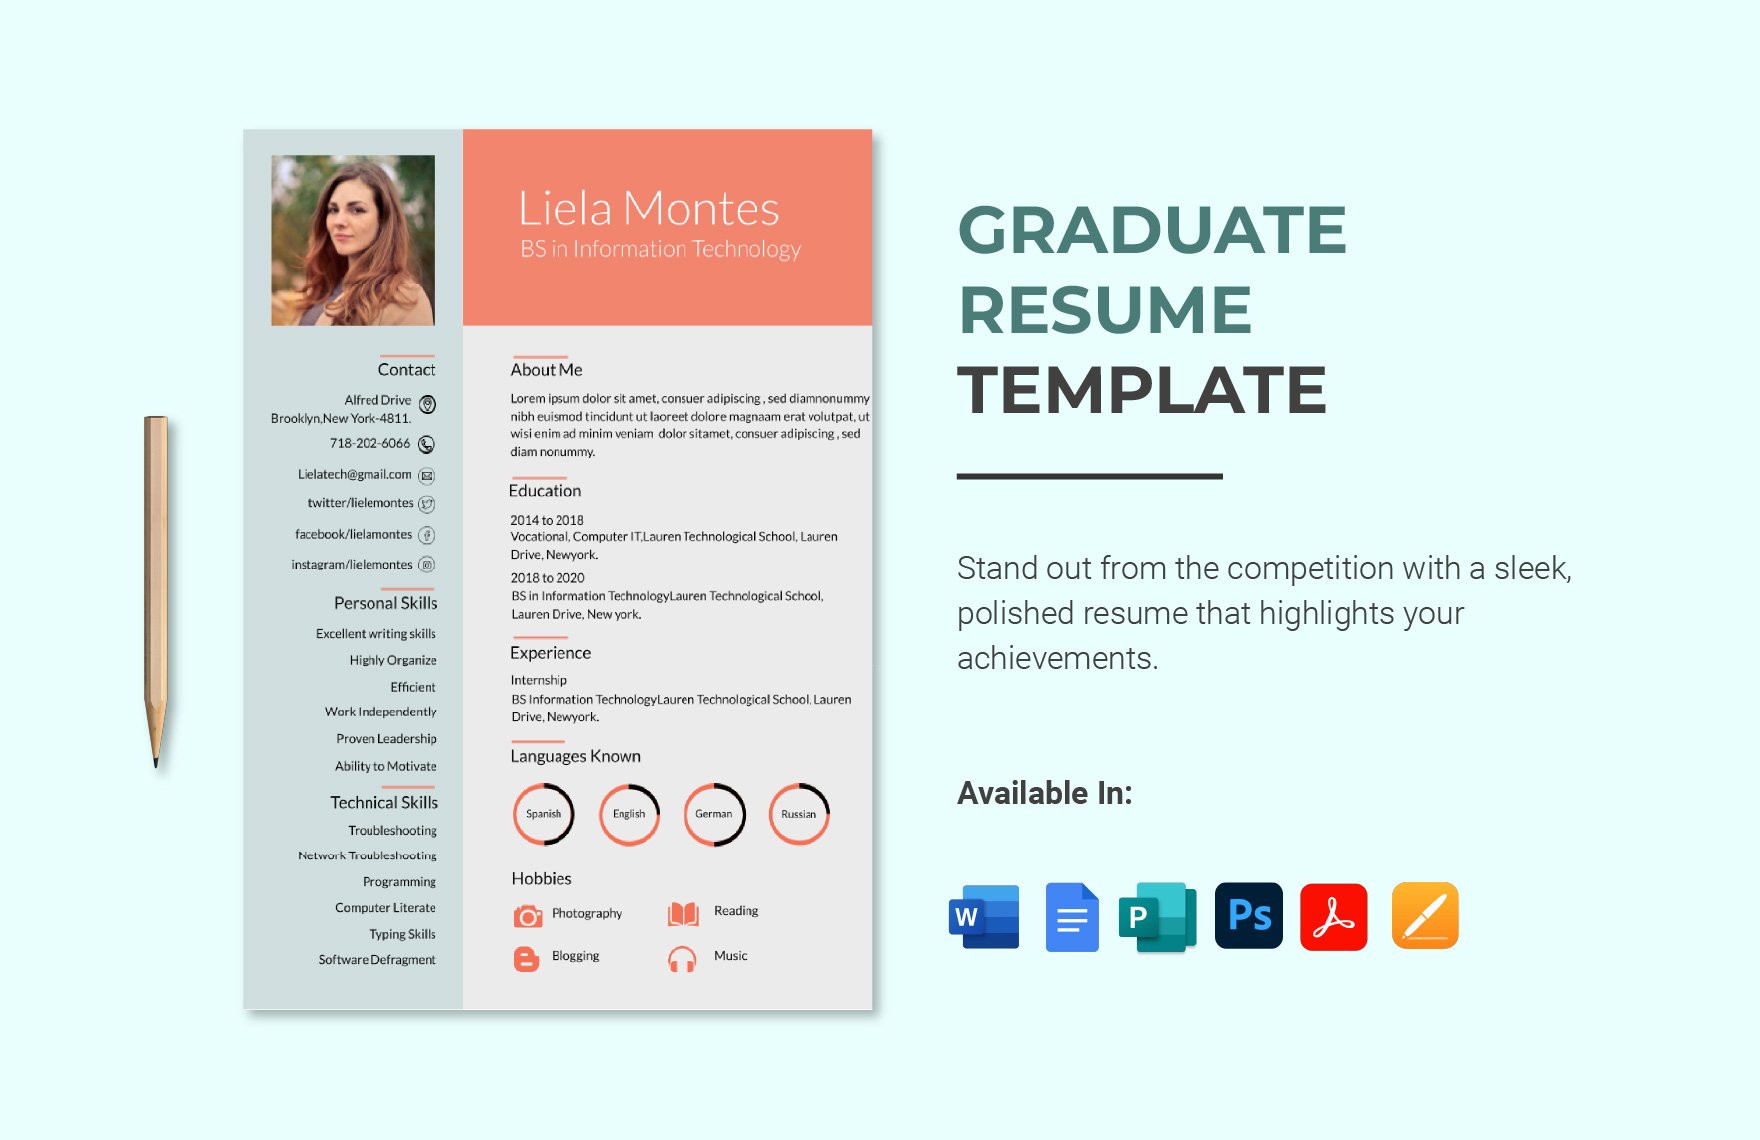 Graduate Resume in Word, Google Docs, PDF, PSD, Apple Pages, Publisher